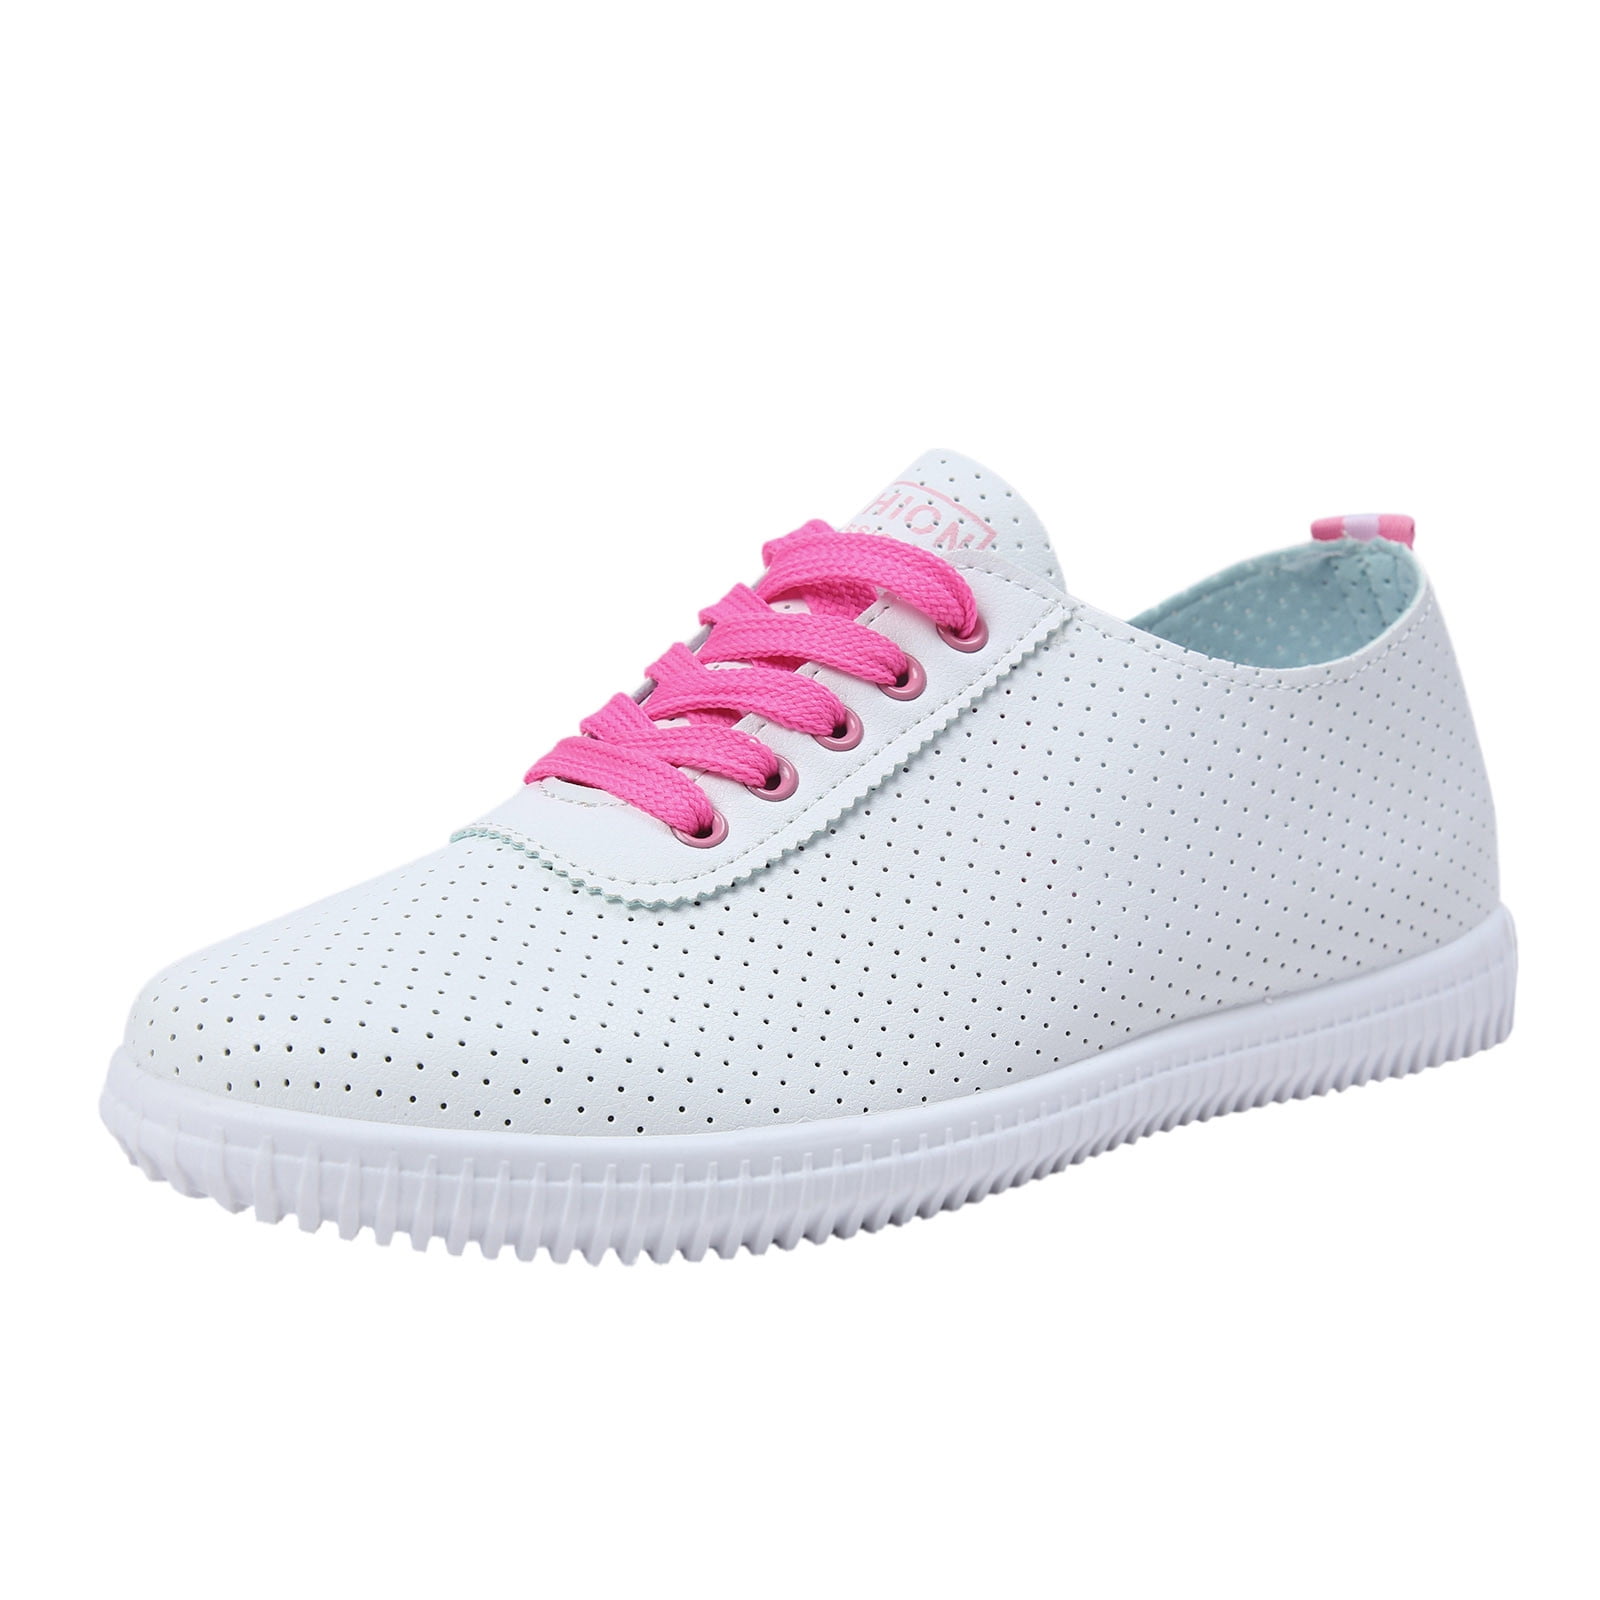 nsendm Female Shoes Adult Women Size 12 Casual Shoes Casual Shoes Unisex  Lightweight Work Shoes Sporty Breathable Casual Shoes Women Wide Width Pink  7 